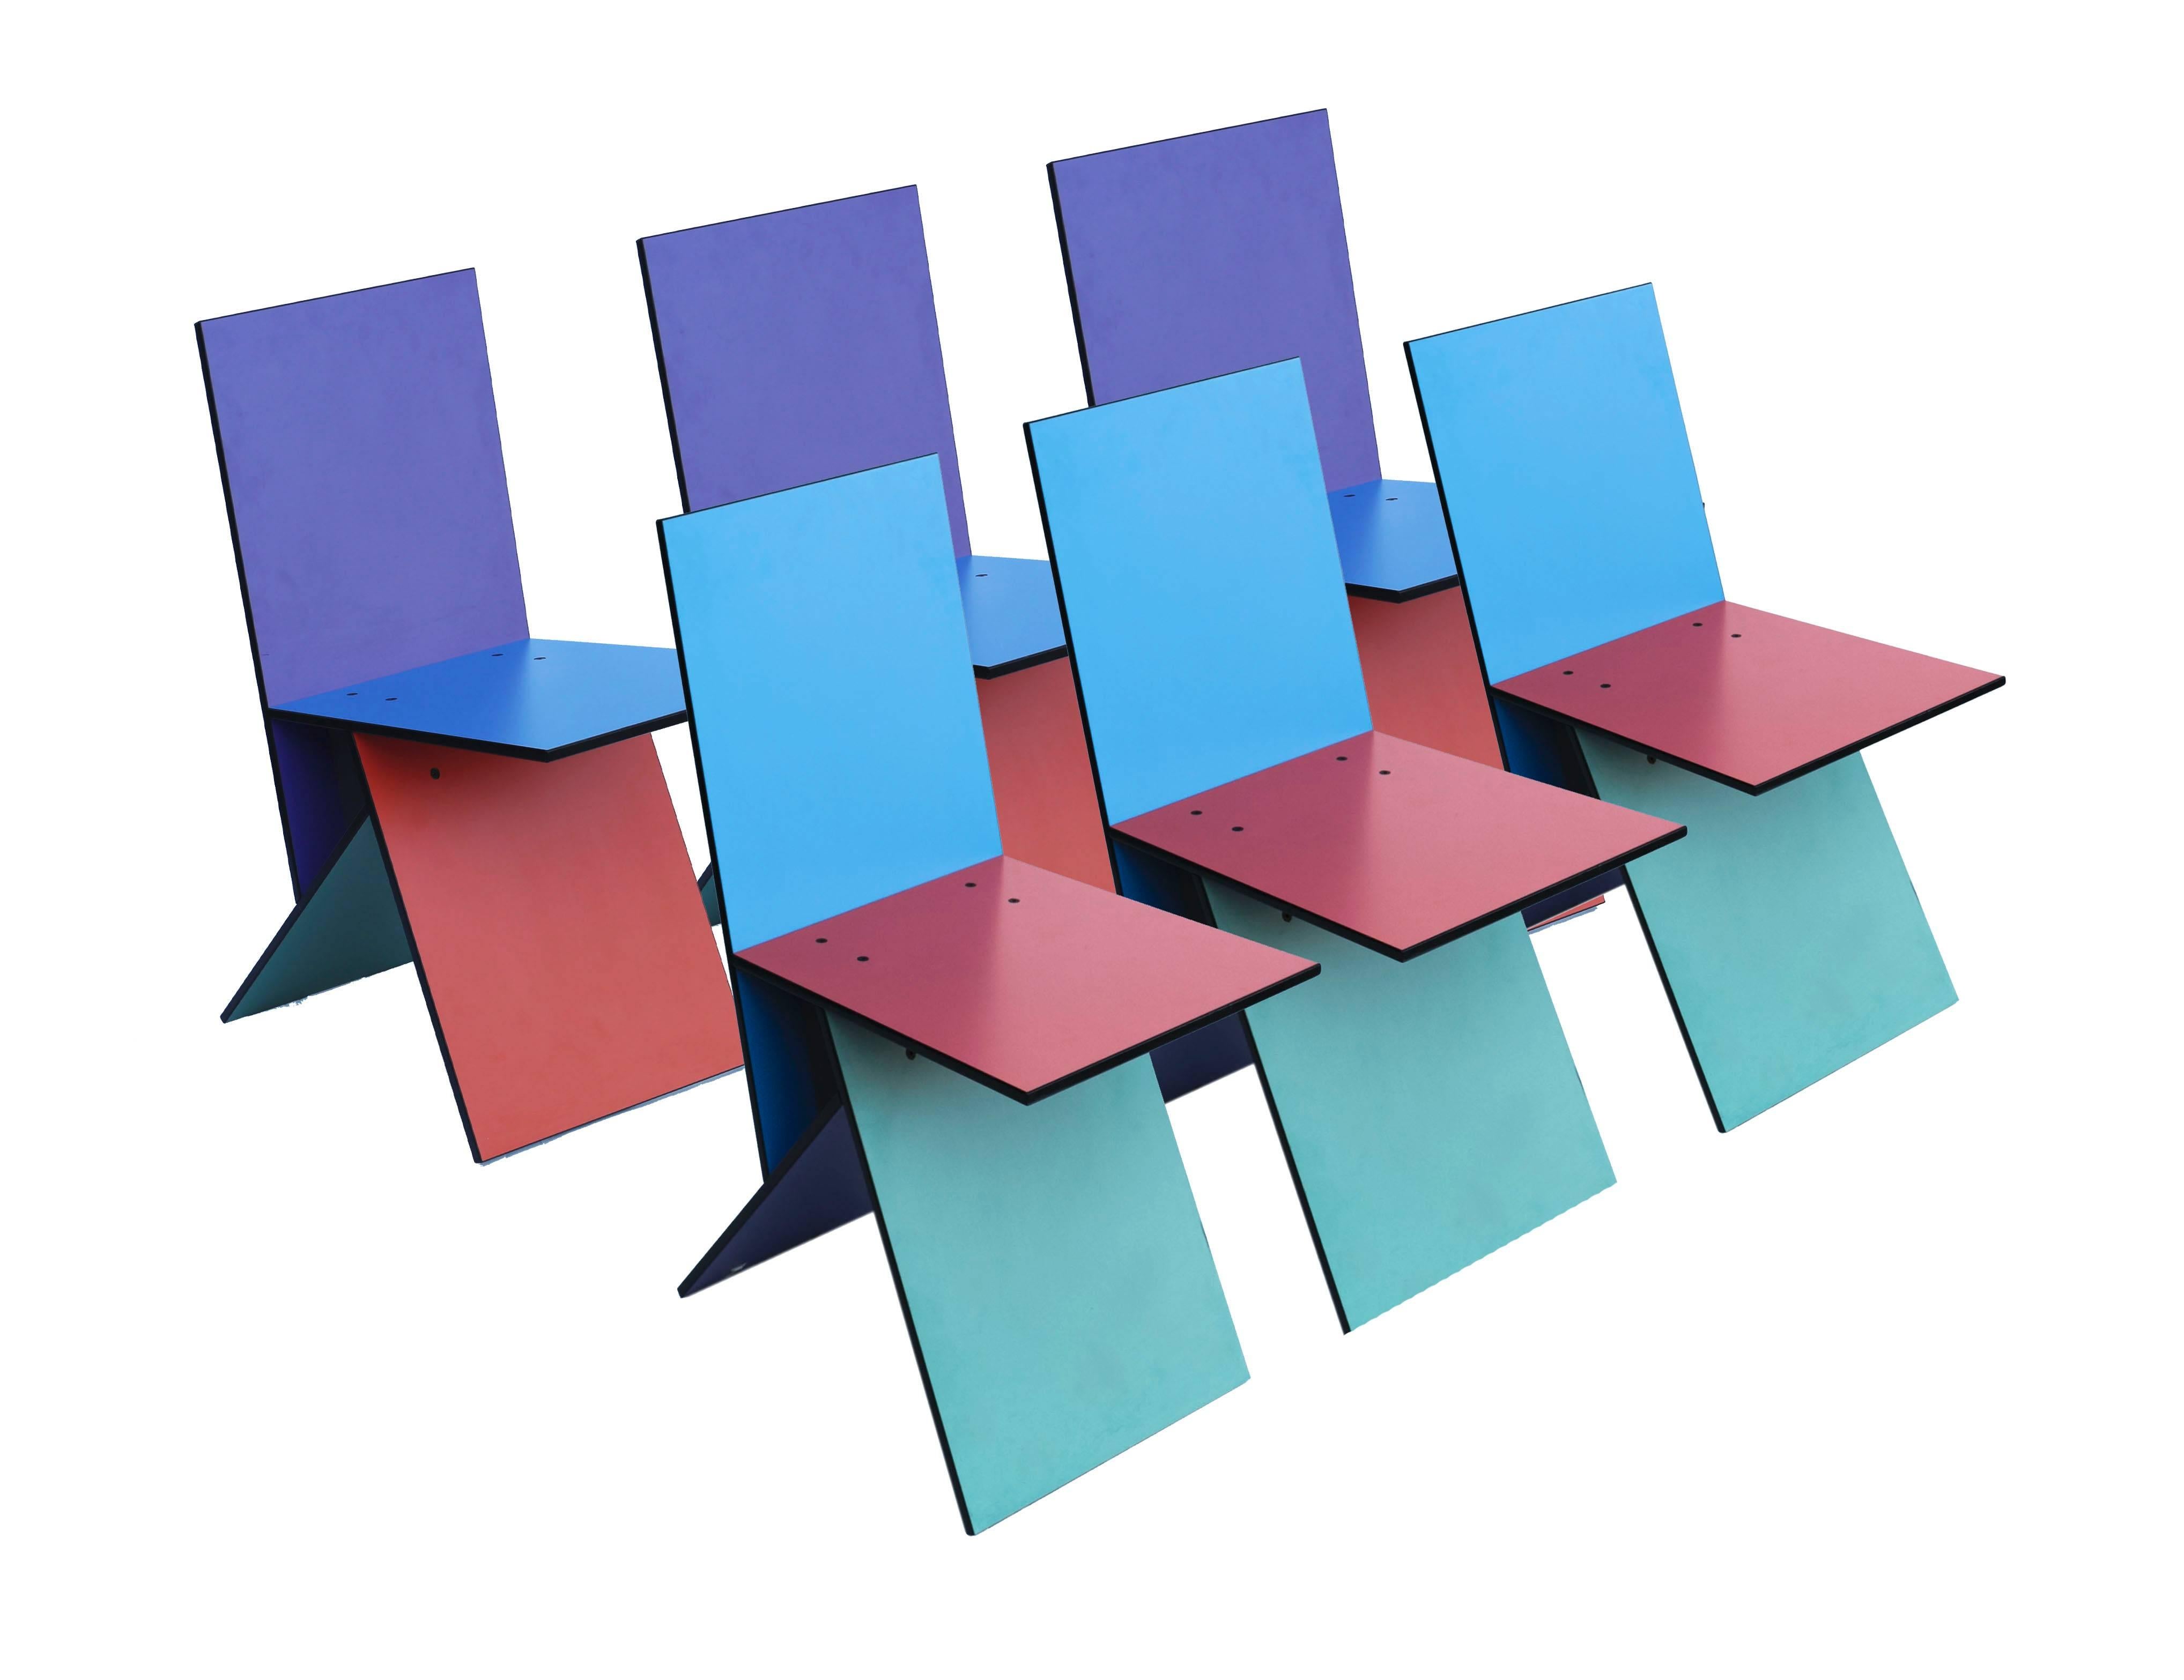 Set of six rare Vilbert chairs designed in 1993 by Verner Panton for Ikea. Only about 4,000 of these chairs were manufactured in a limited run. This was one of his final designs.

These chairs consist of four multicolored melamine coated MDF